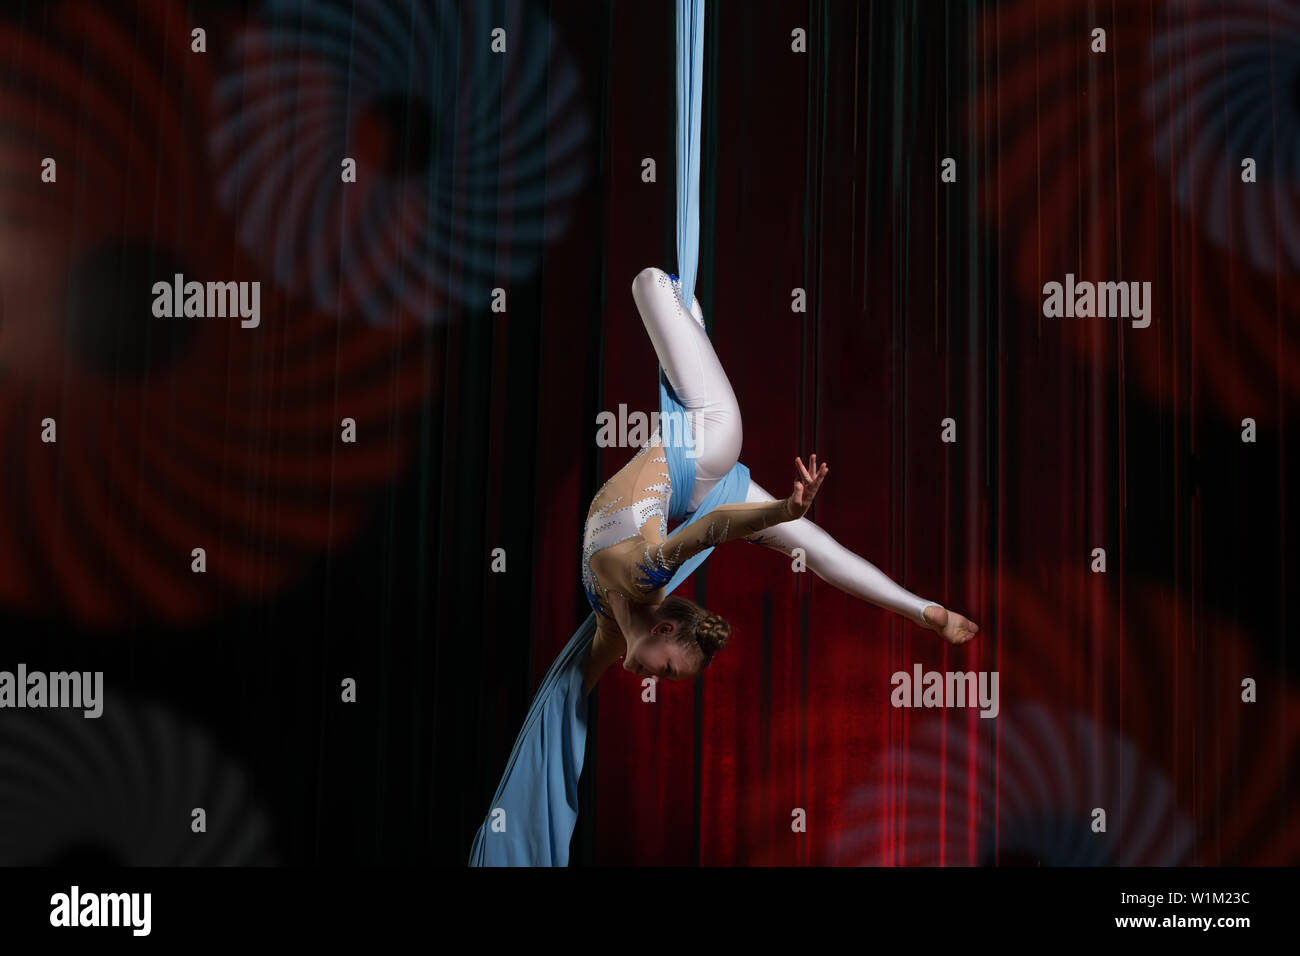 Circus artist acrobat performance on canvases. The girl perform acrobatic elements in the air. Stock Photo